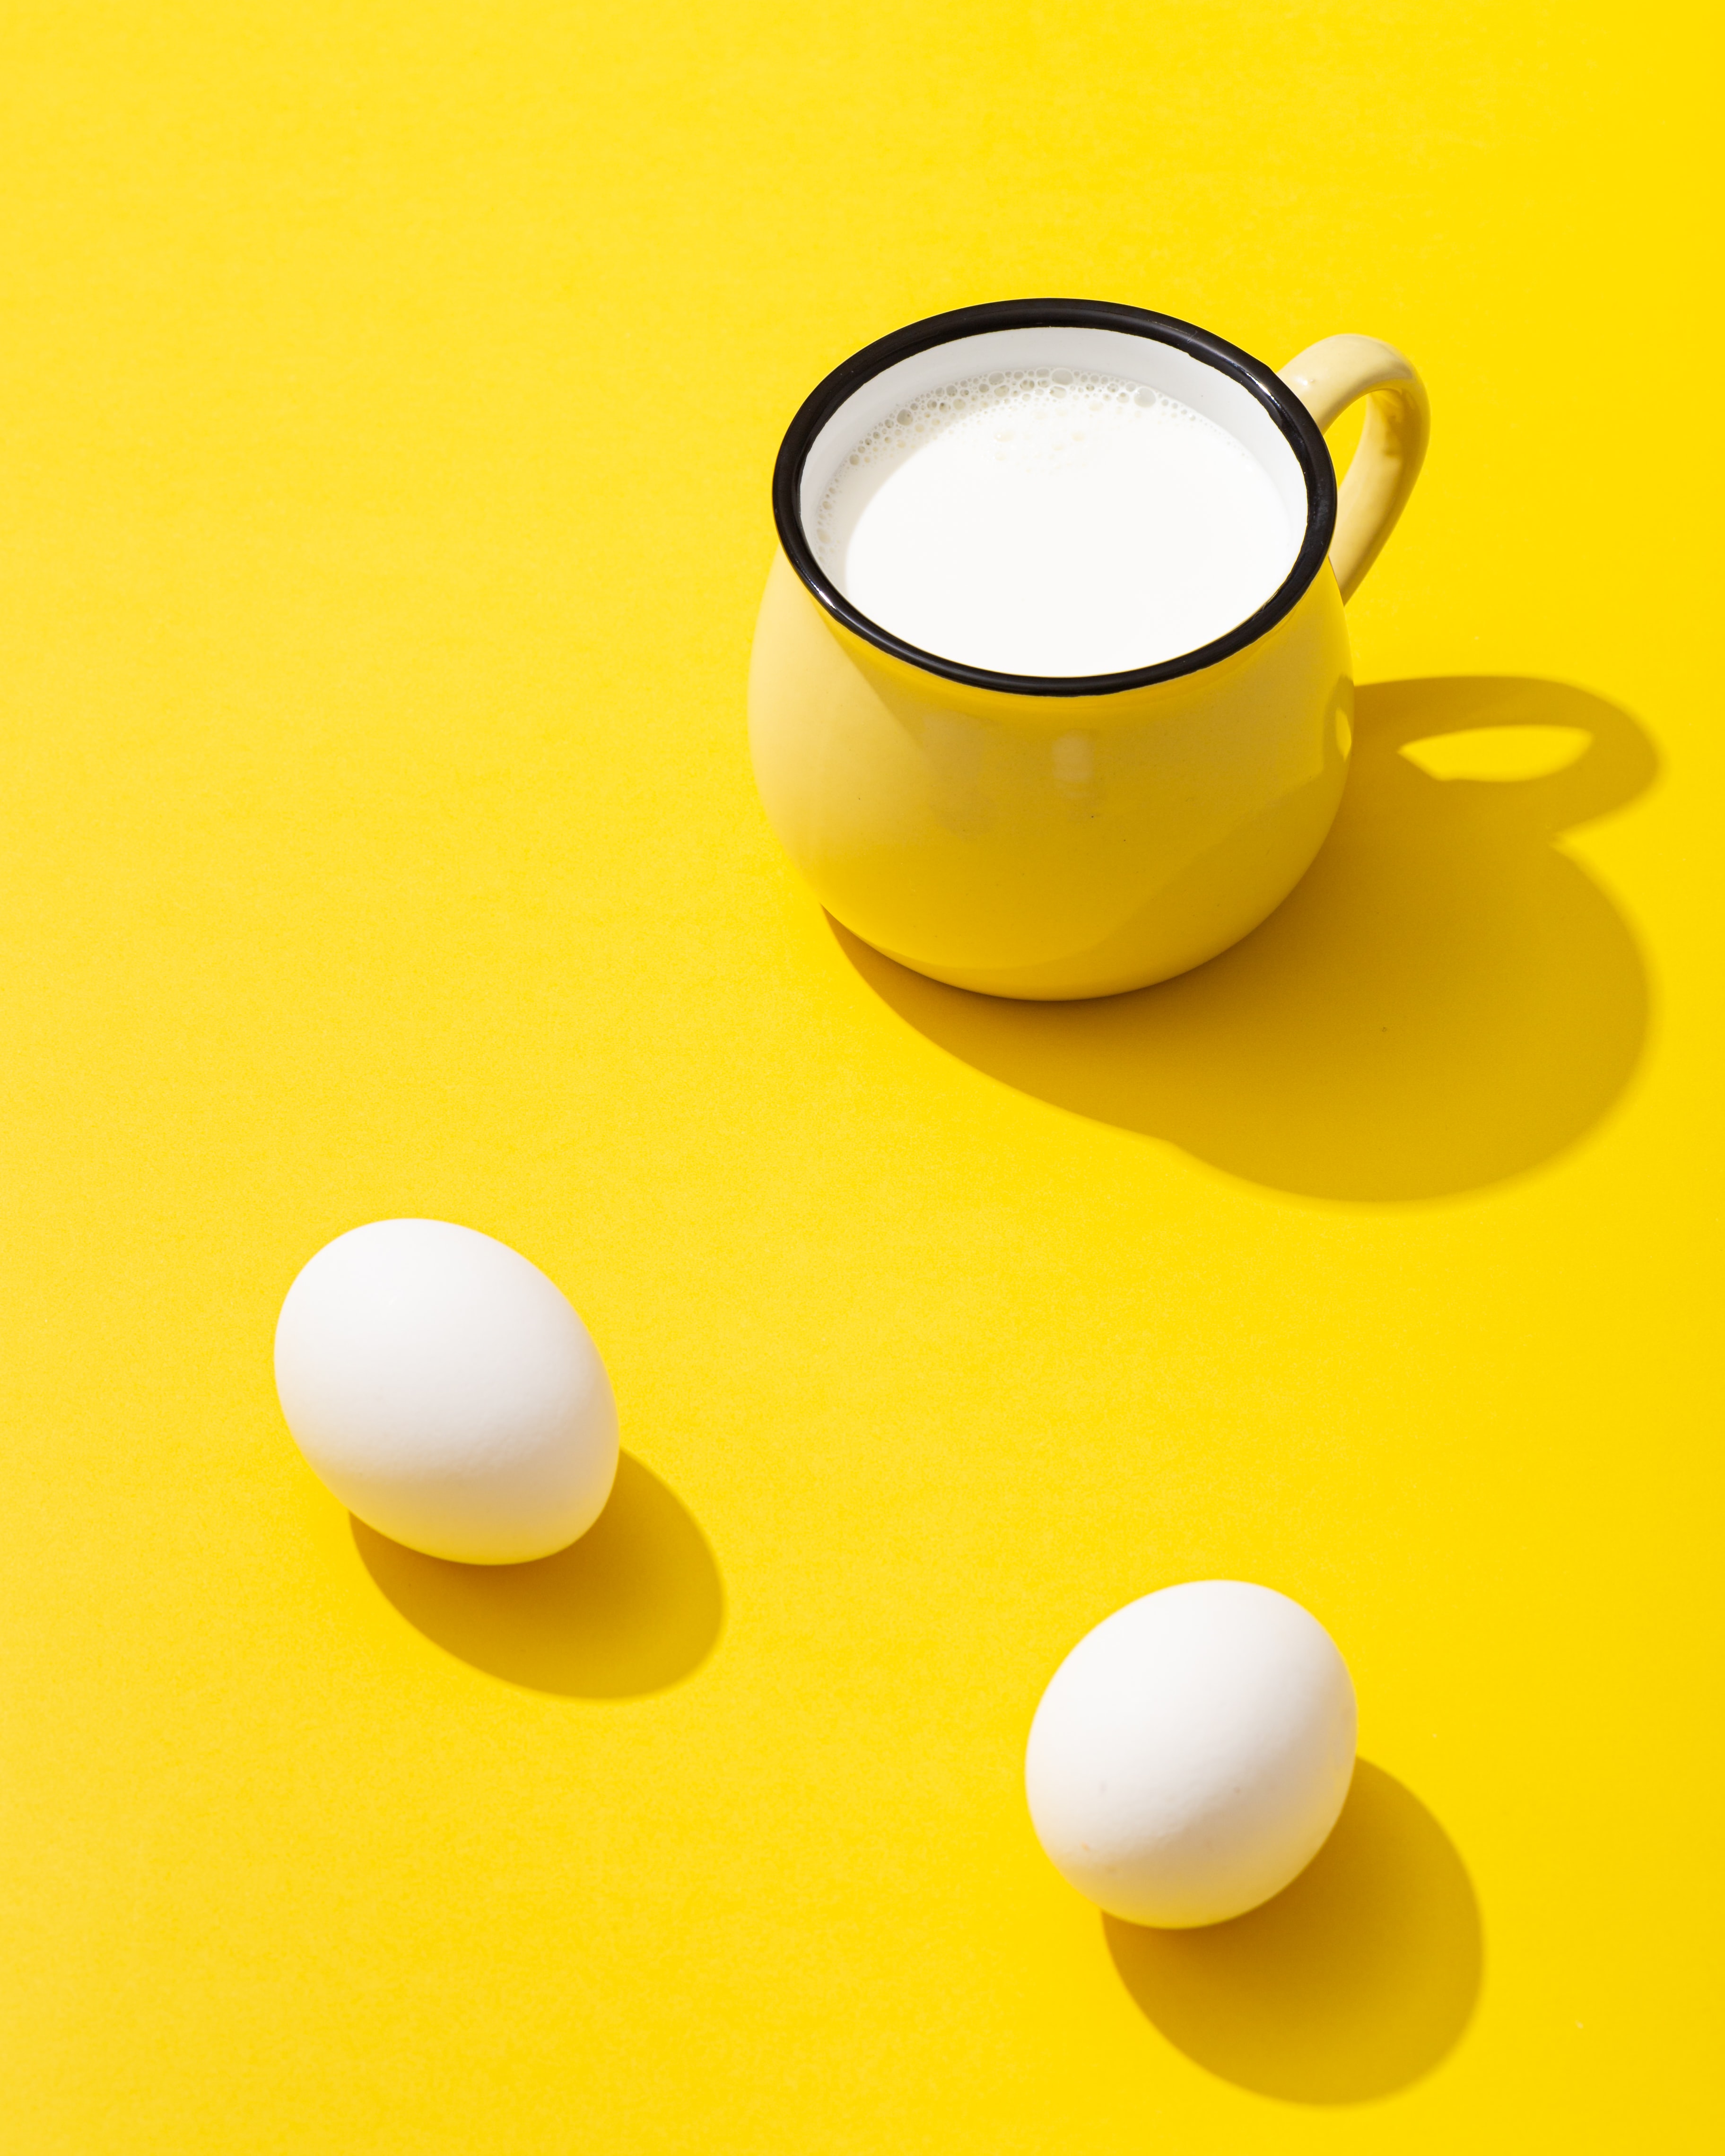 food, eggs, yellow, cup, milk wallpaper for mobile